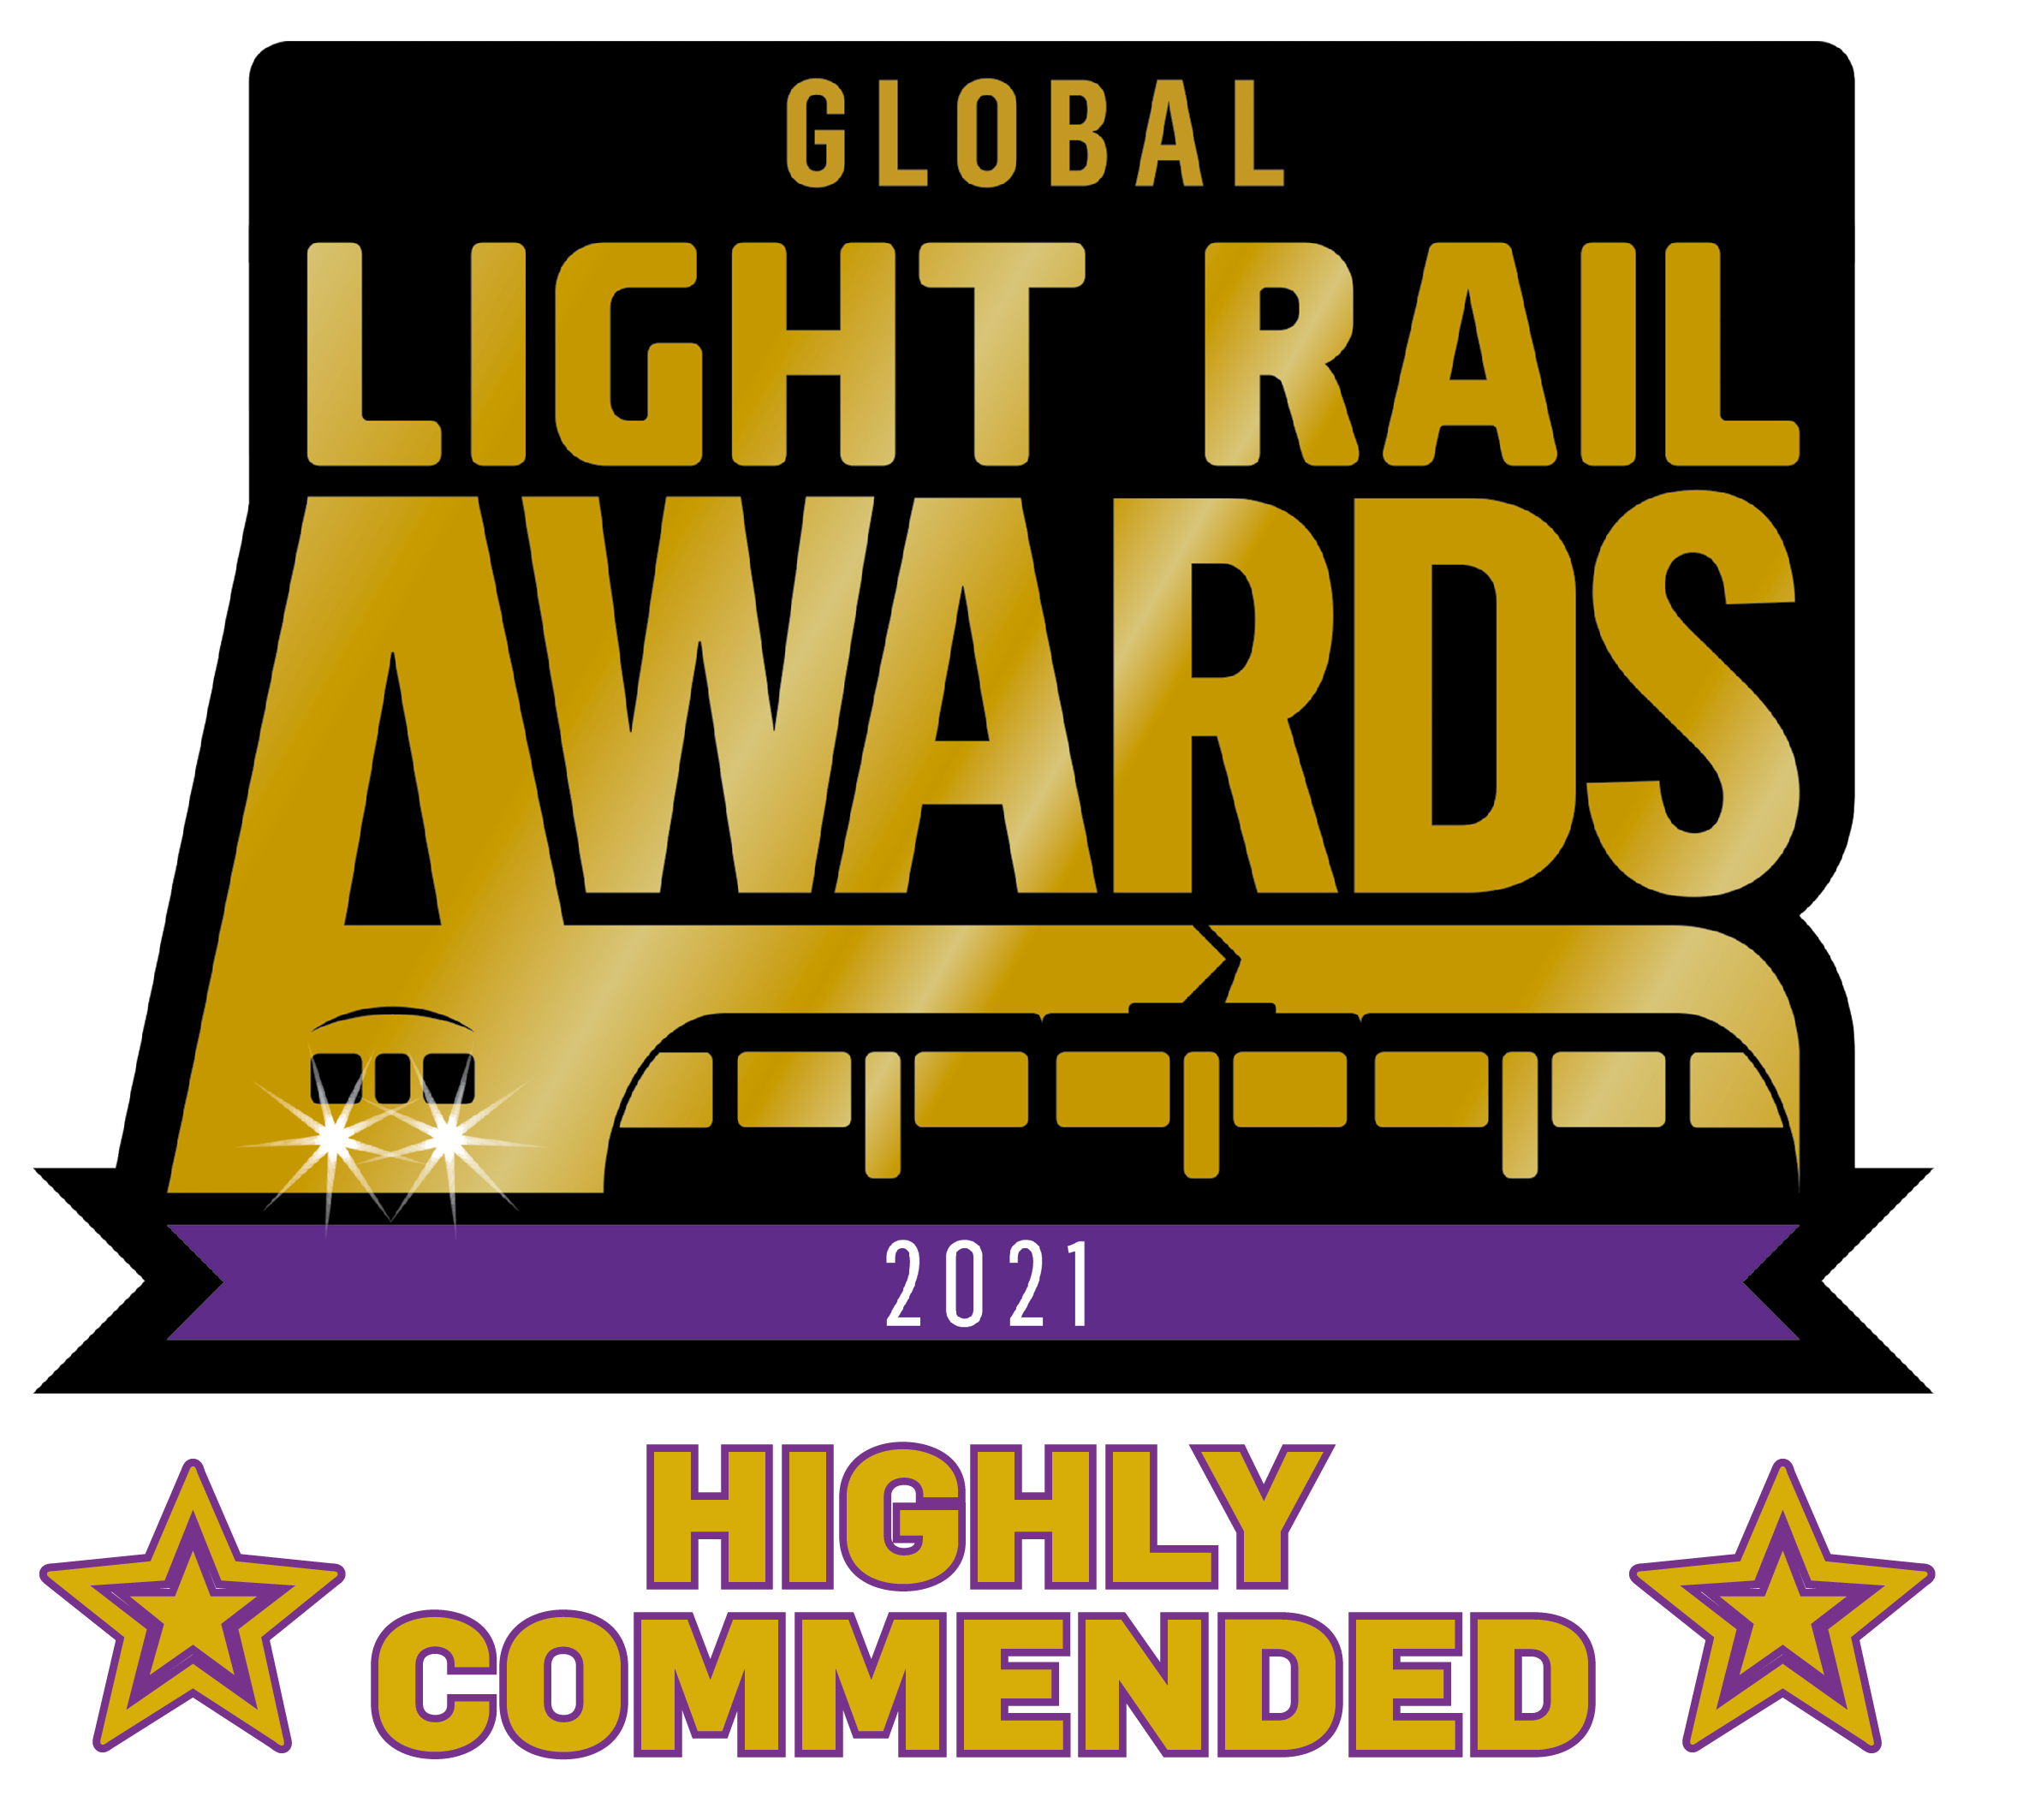 Morrison Energy Services has been highly commended at this year’s Global Light Rail Awards for the Team of the Year Award	